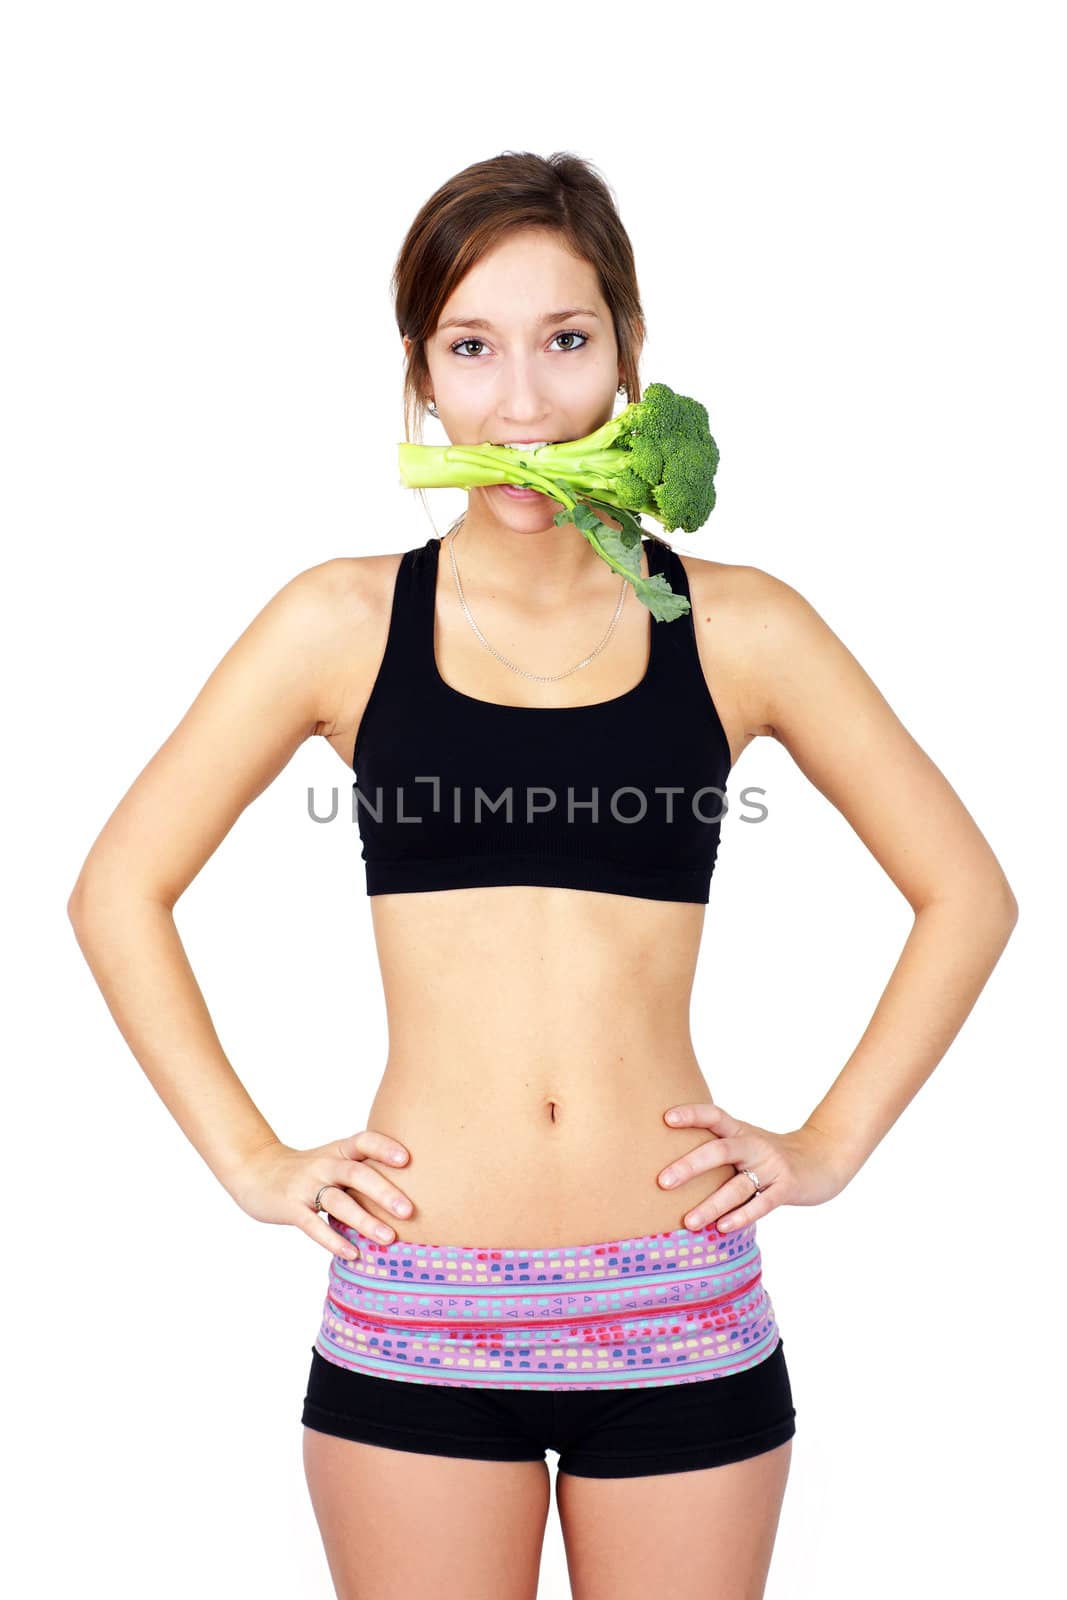 Humorous nutrition concept: slim, healthy and fit young woman with broccoli stalk in her mouth.